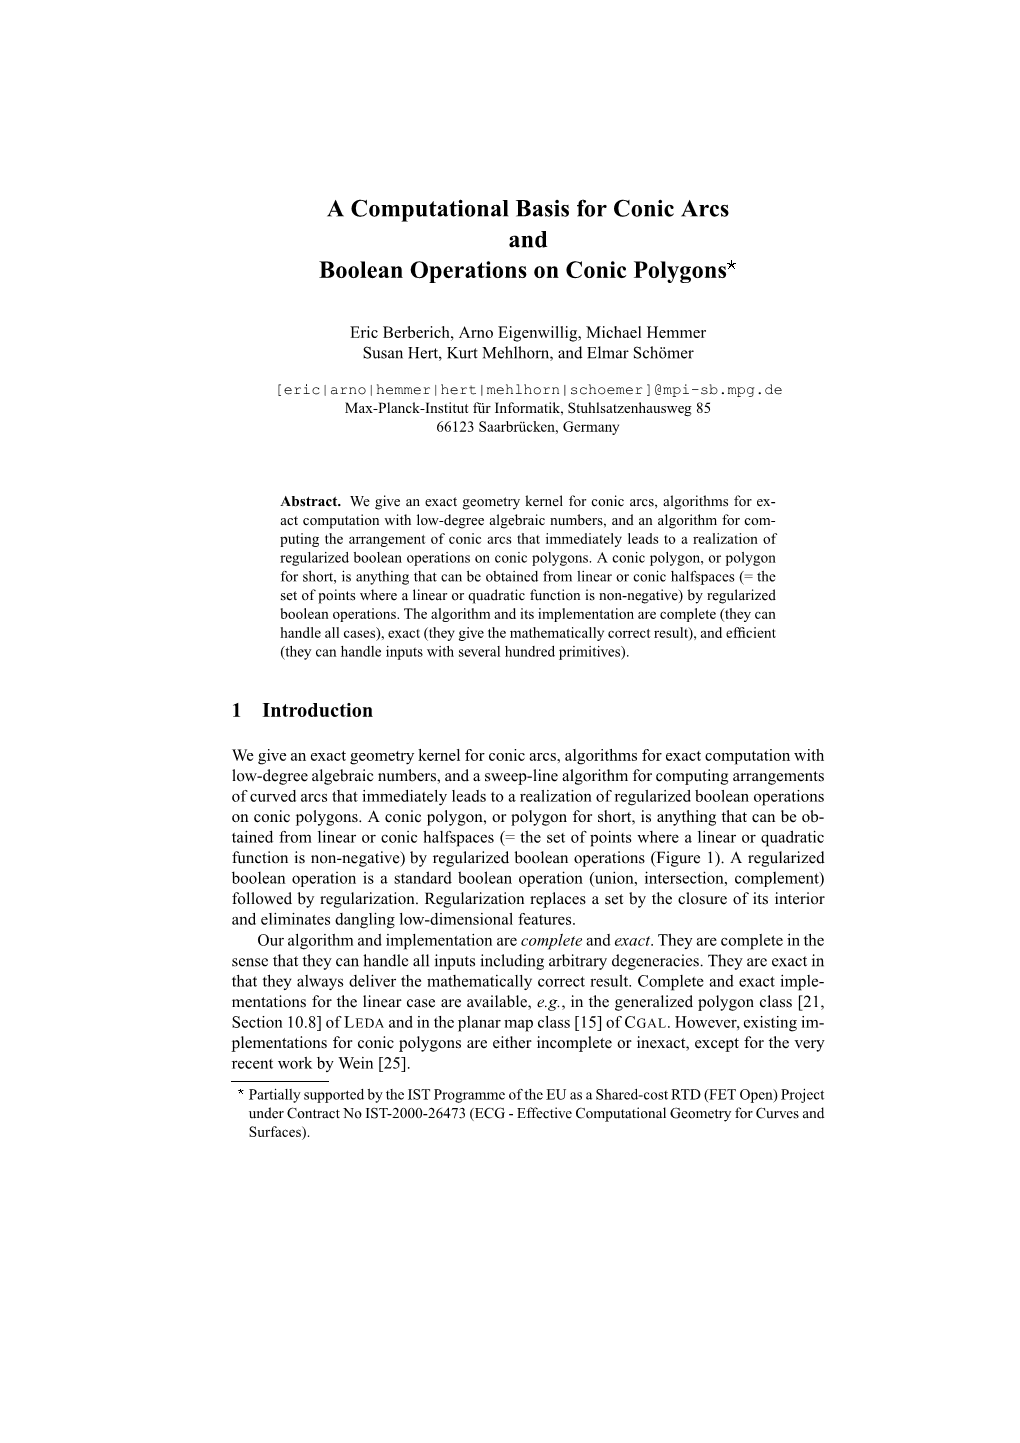 A Computational Basis for Conic Arcs and Boolean Operations on Conic Polygons